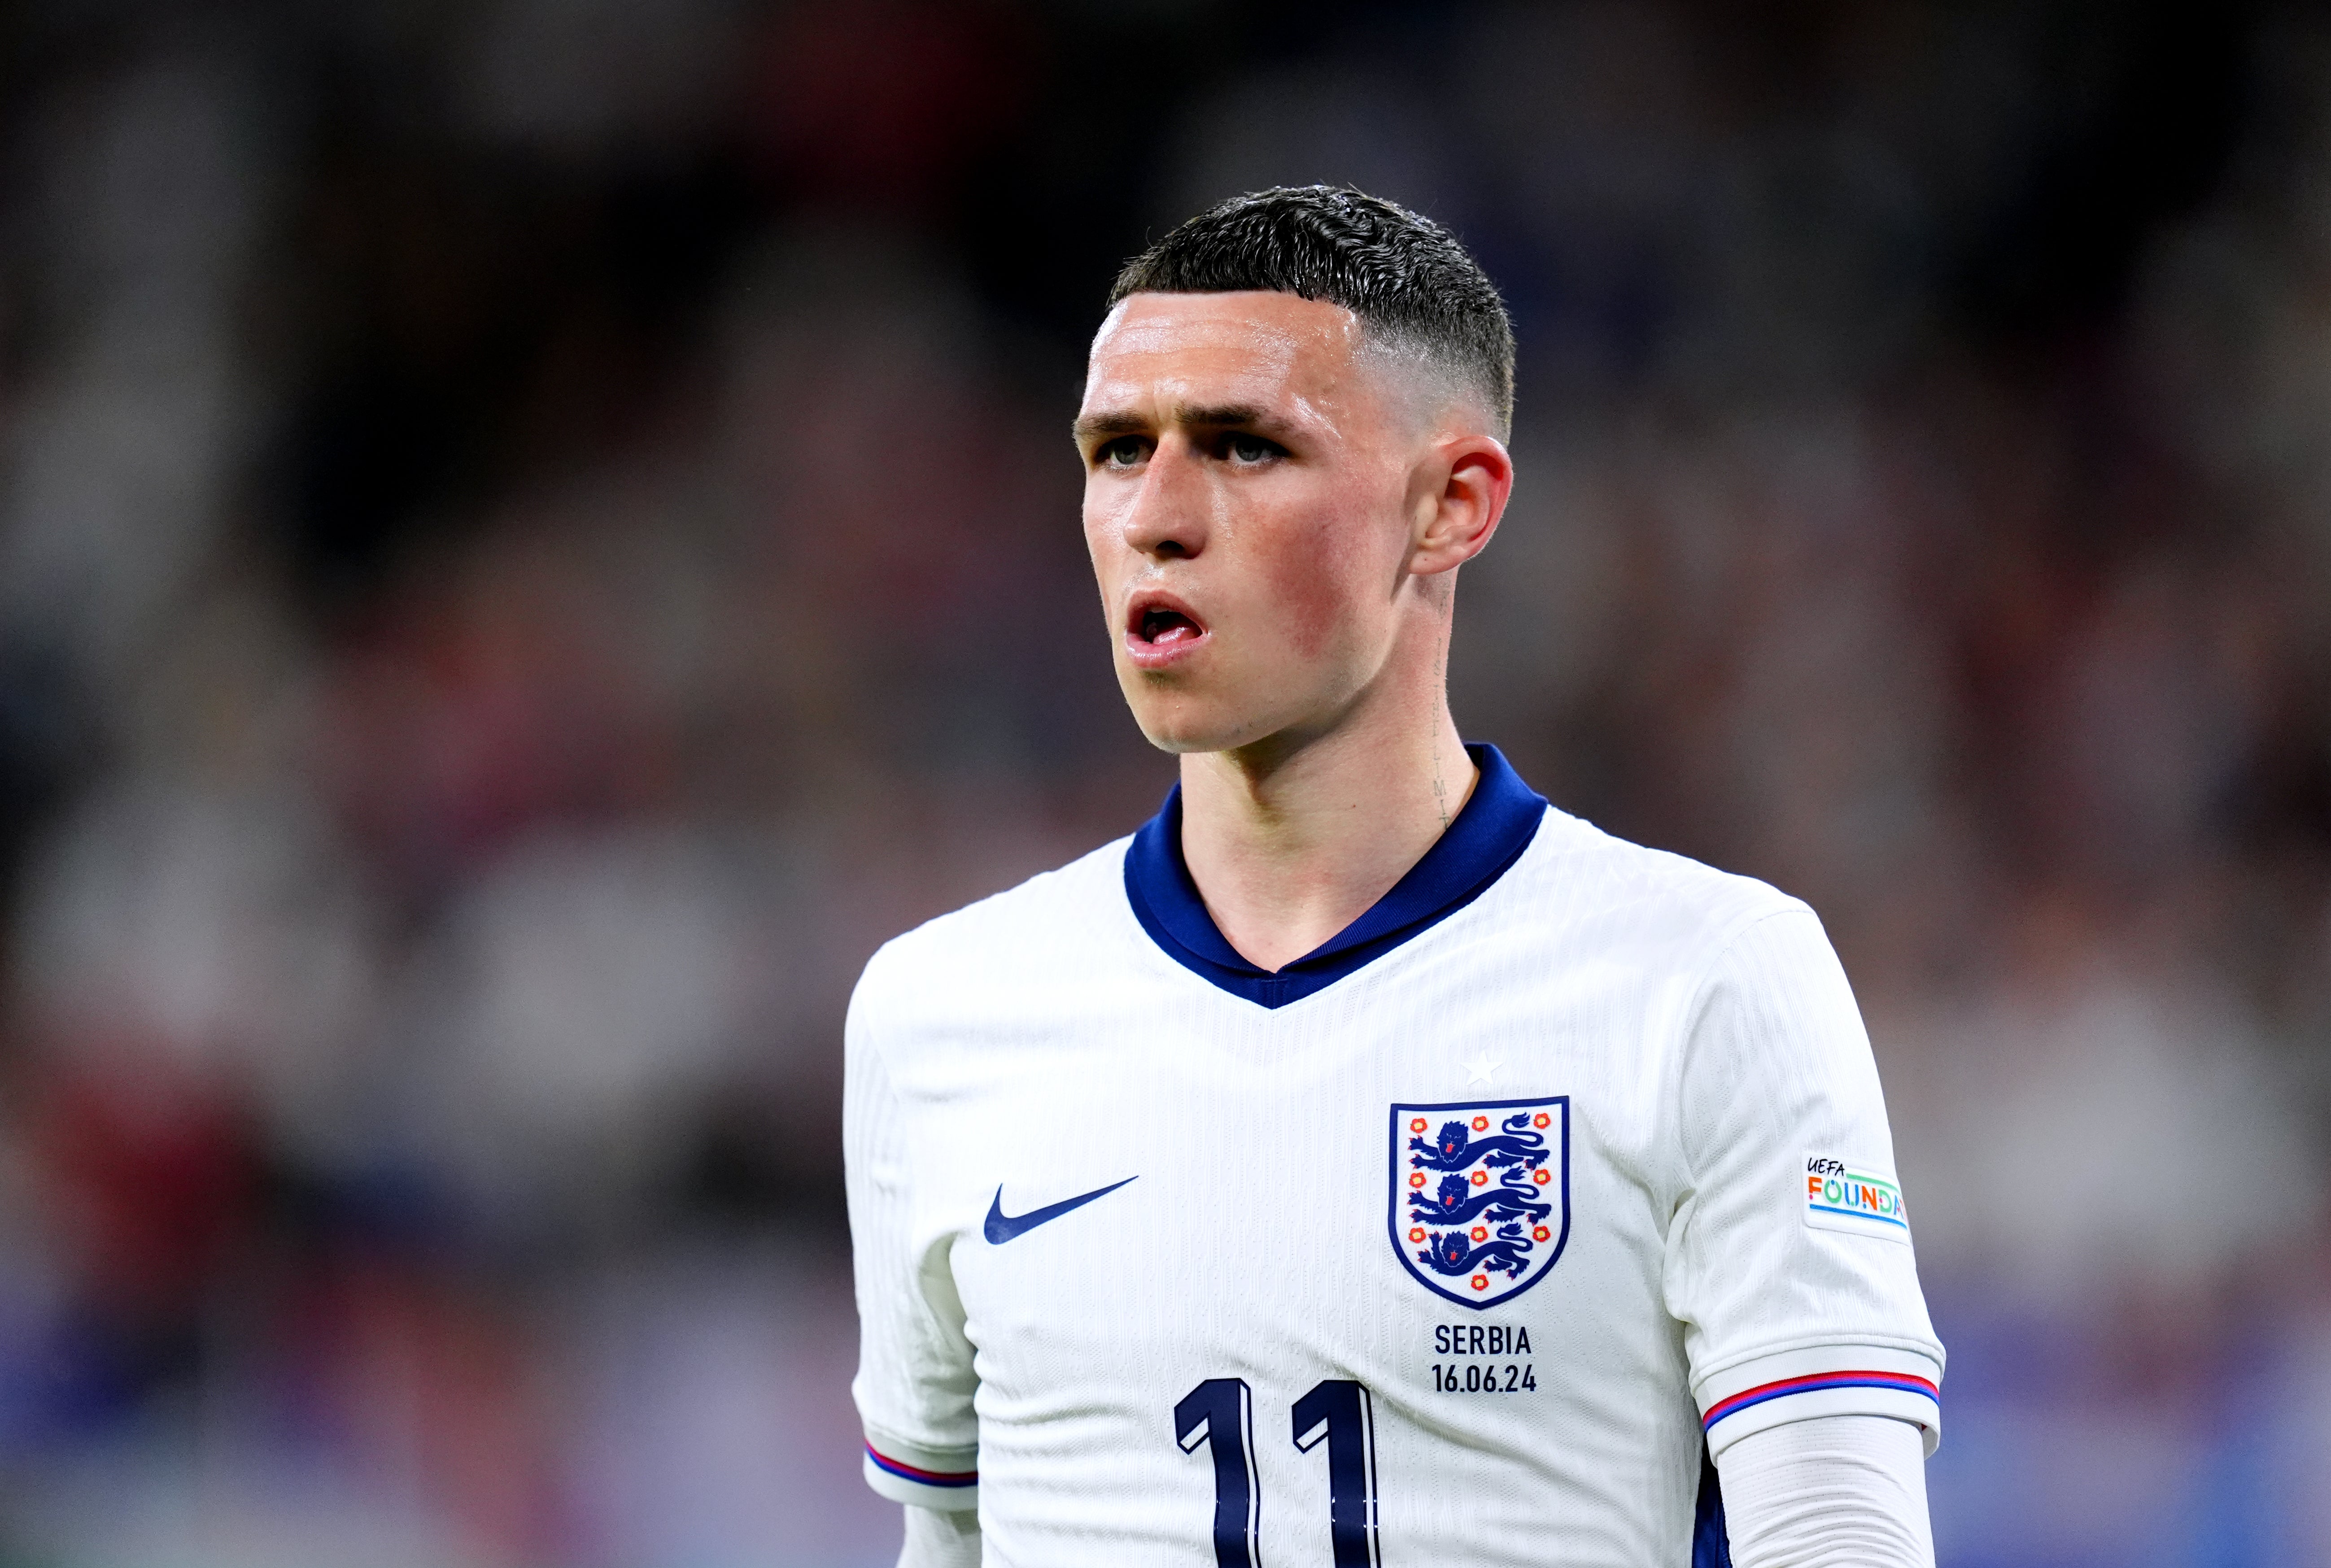 Phil Foden had a quiet opening night against Serbia